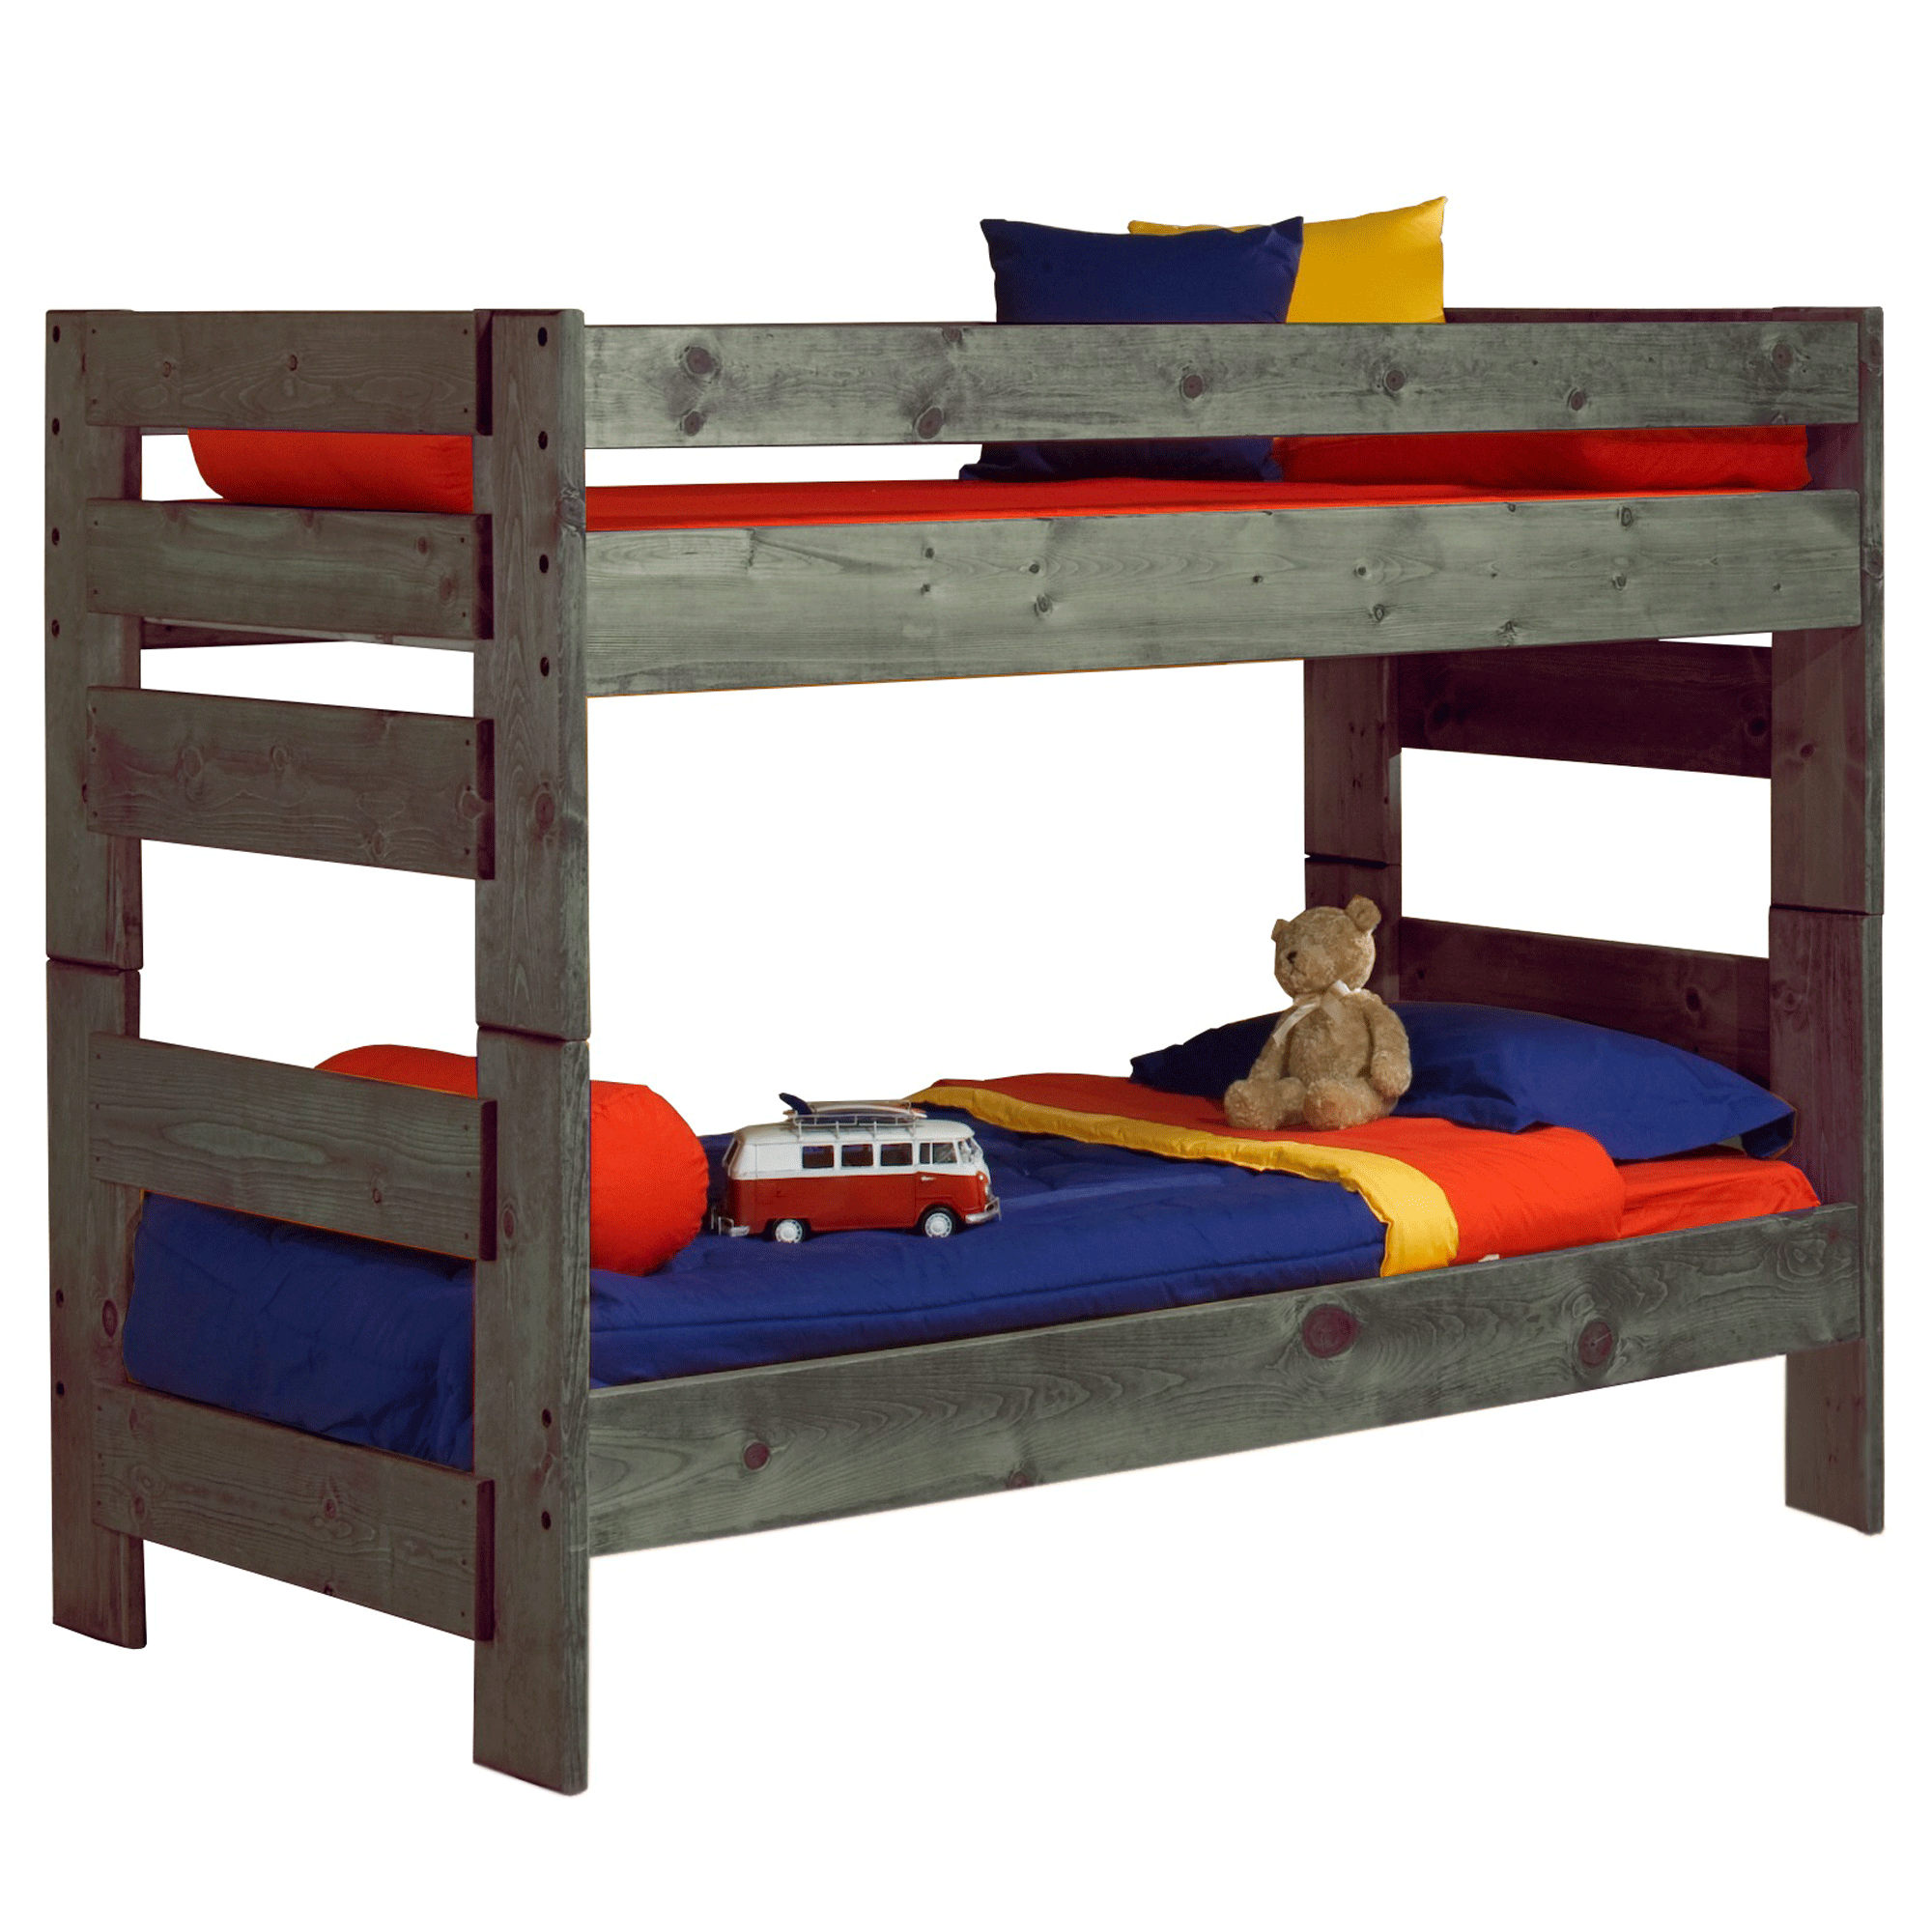 Kids Bunk Beds Affordable, Bristol Valley Bunk Bed With Stairs